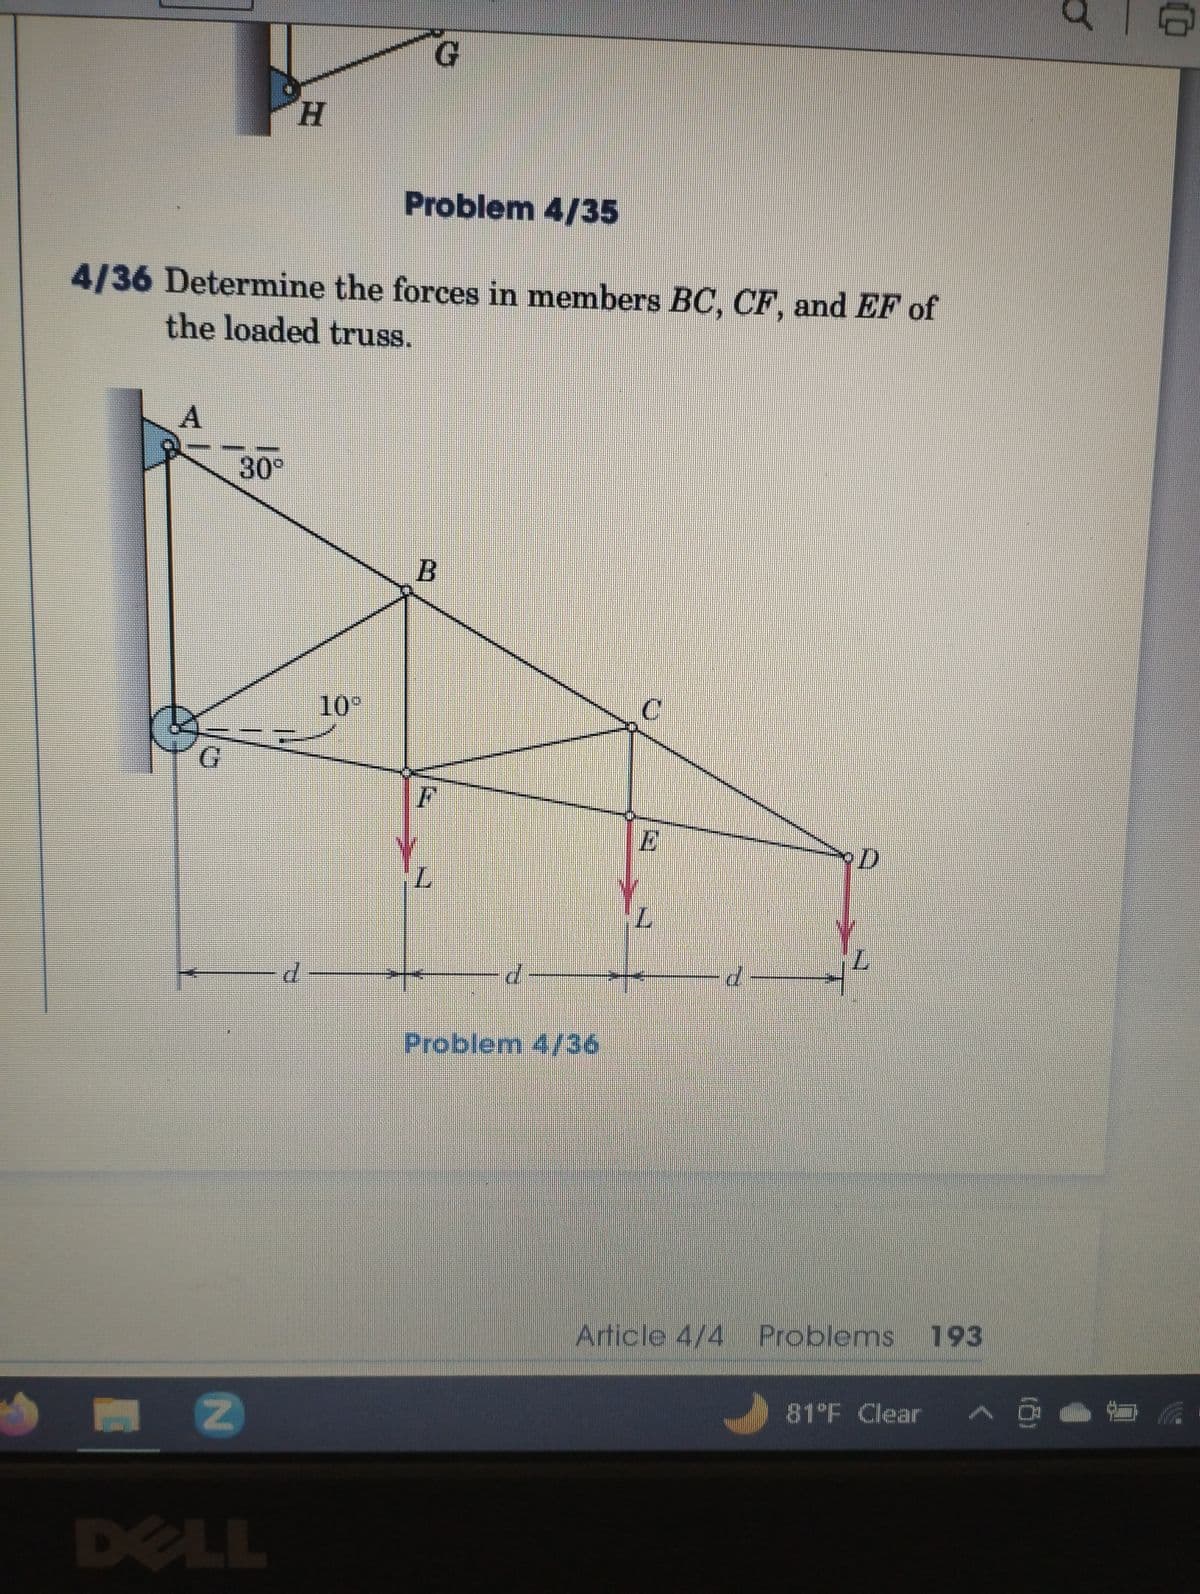 A
G
4/36 Determine the forces in members BC, CF, and EF of
the loaded truss.
Z
H
30°
d
G
10°
Problem 4/35
B
F
d
Problem 4/36
C
E
Z
d
L
Article 4/4 Problems 193
81°F Clear w
6
0